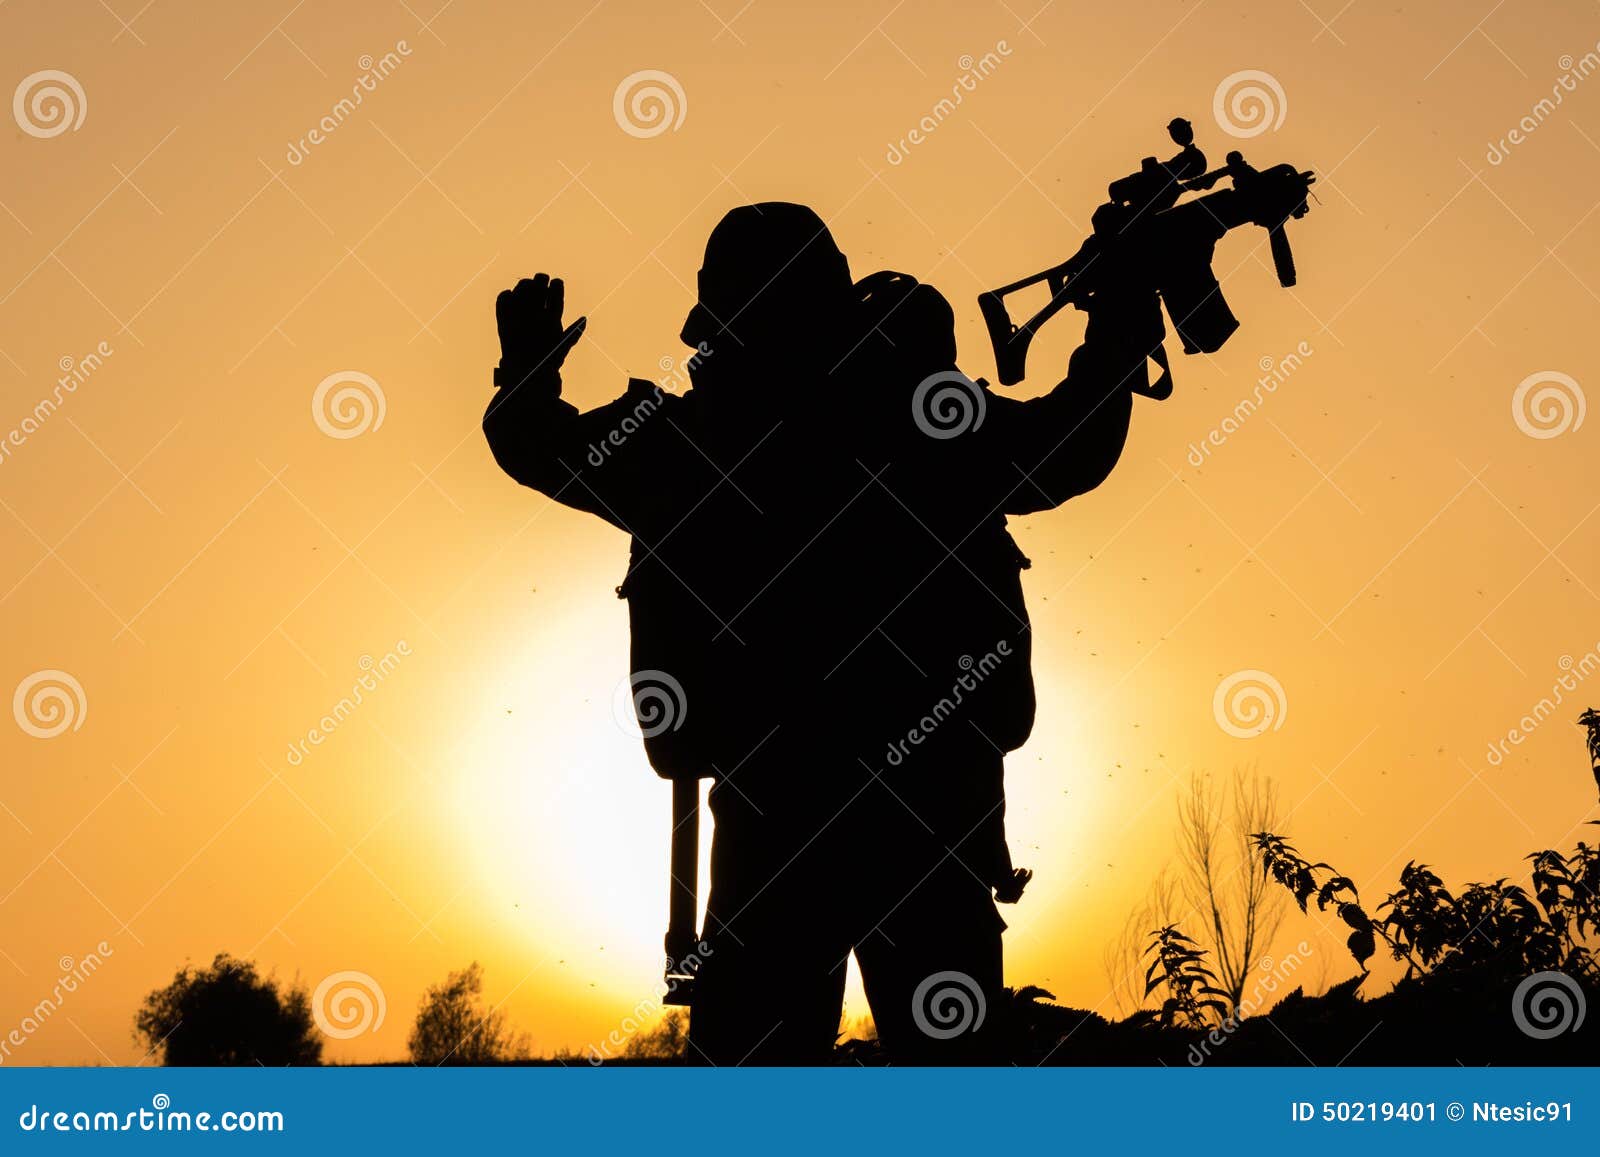 sunset of soldier crouched in uniform